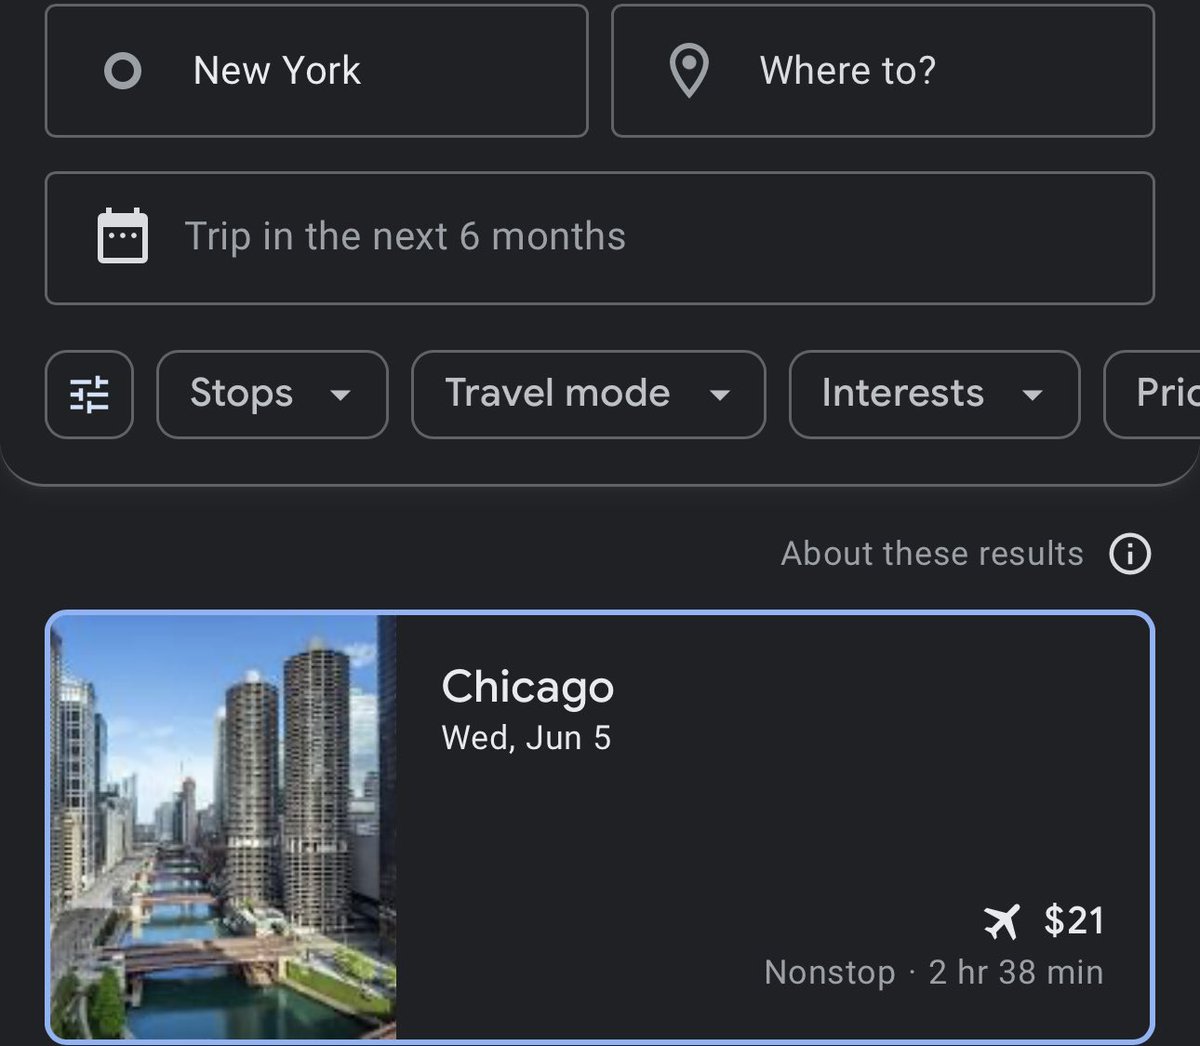 Flights prices to Chicago looking immaculate 👀